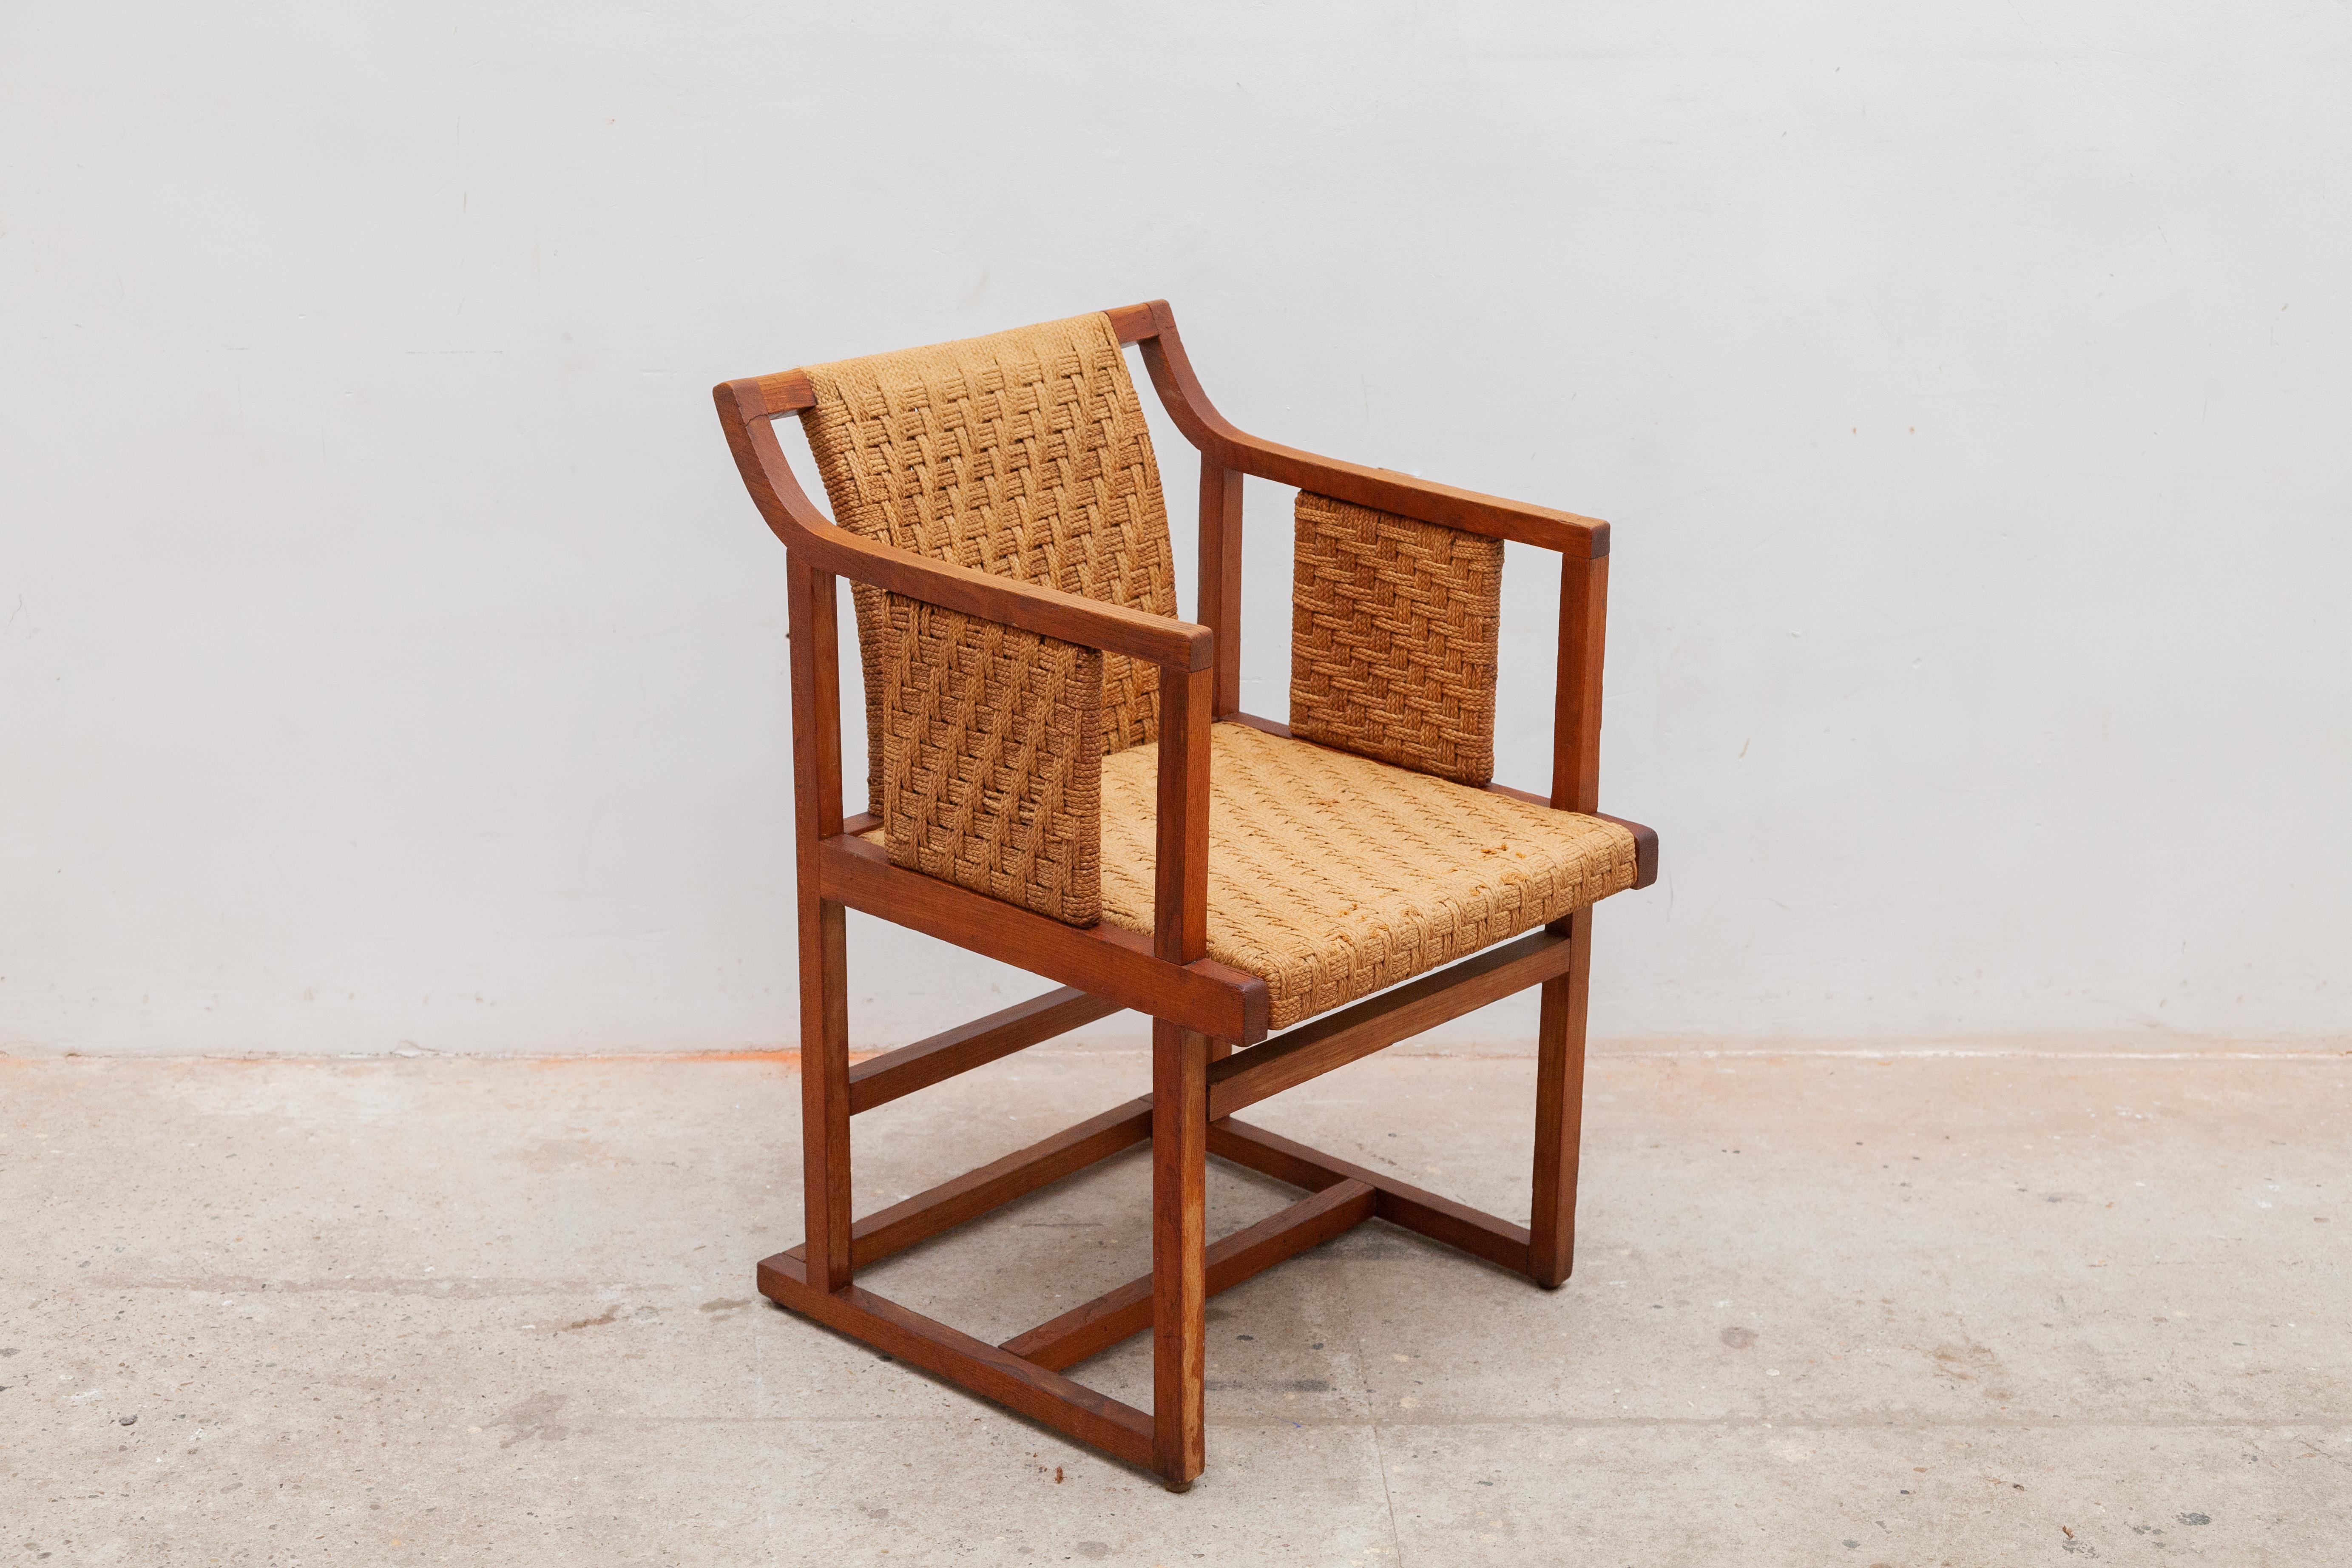 A side chair by Bauhaus attributed to designer Erich Dieckmann (1896 - 1944), made of a solid wood frame with a papercord weaving seating and backrest.In very good original condition.

 